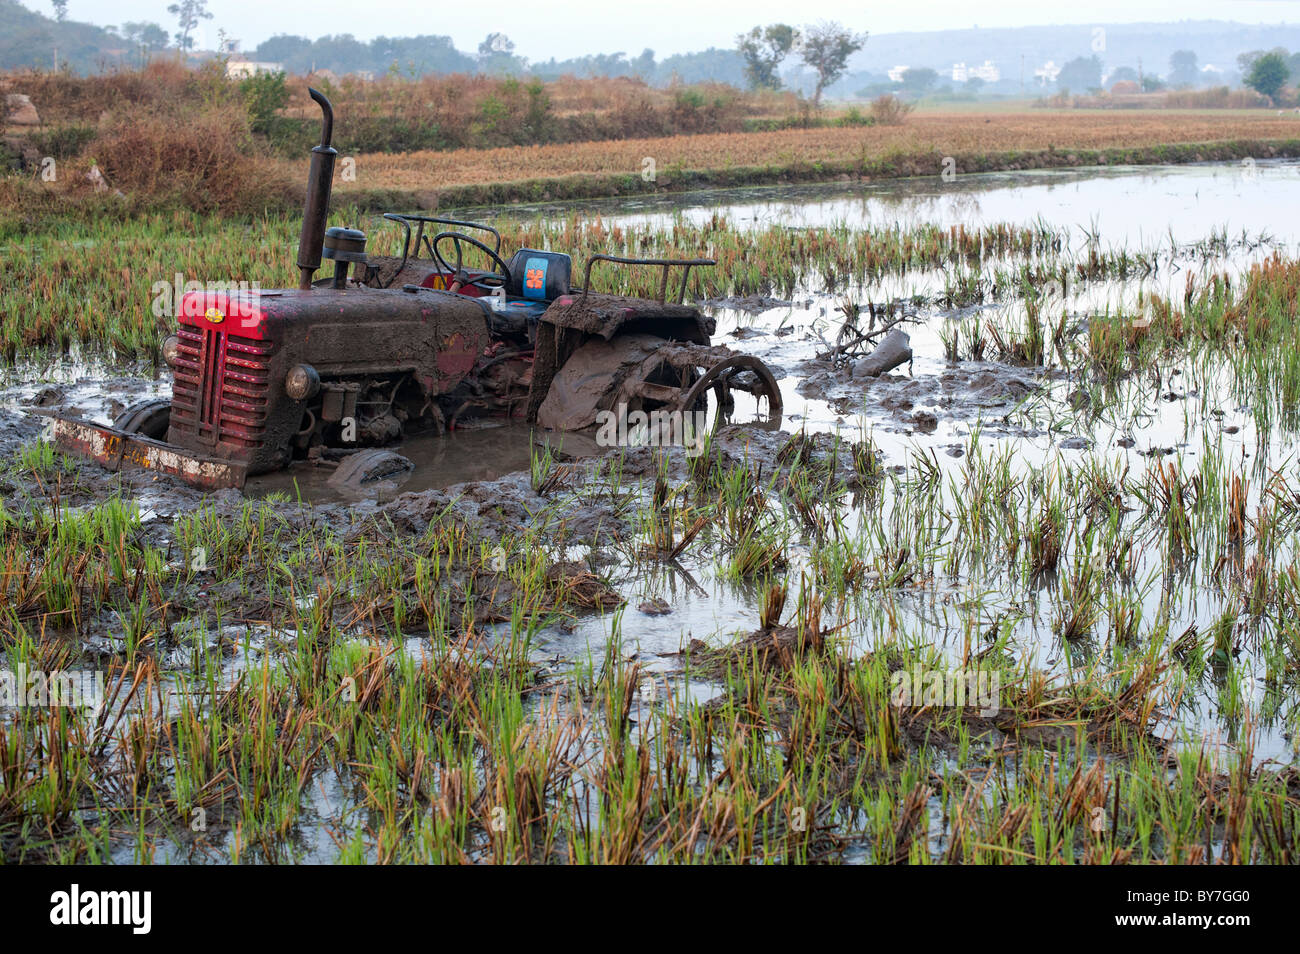 Indian tractor stuck in the rice paddy mud. Andhra Pradesh, India Stock Photo